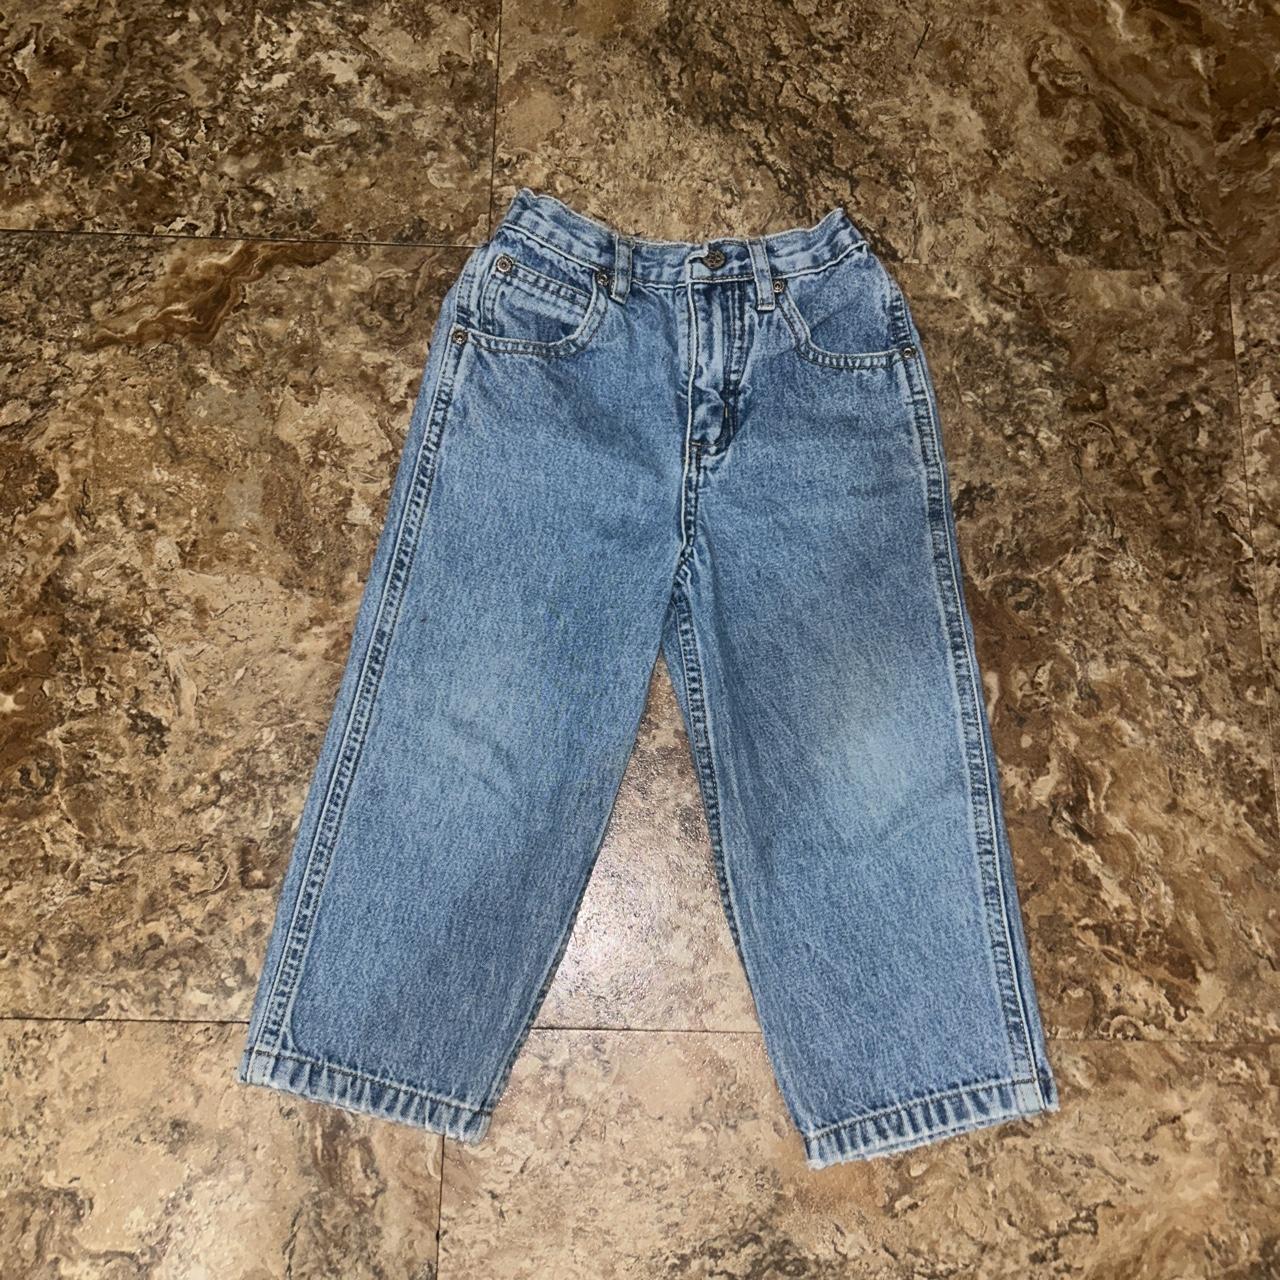 Toddler size 3T Faded Glory jeans #Toddler #Fadedglory - Depop